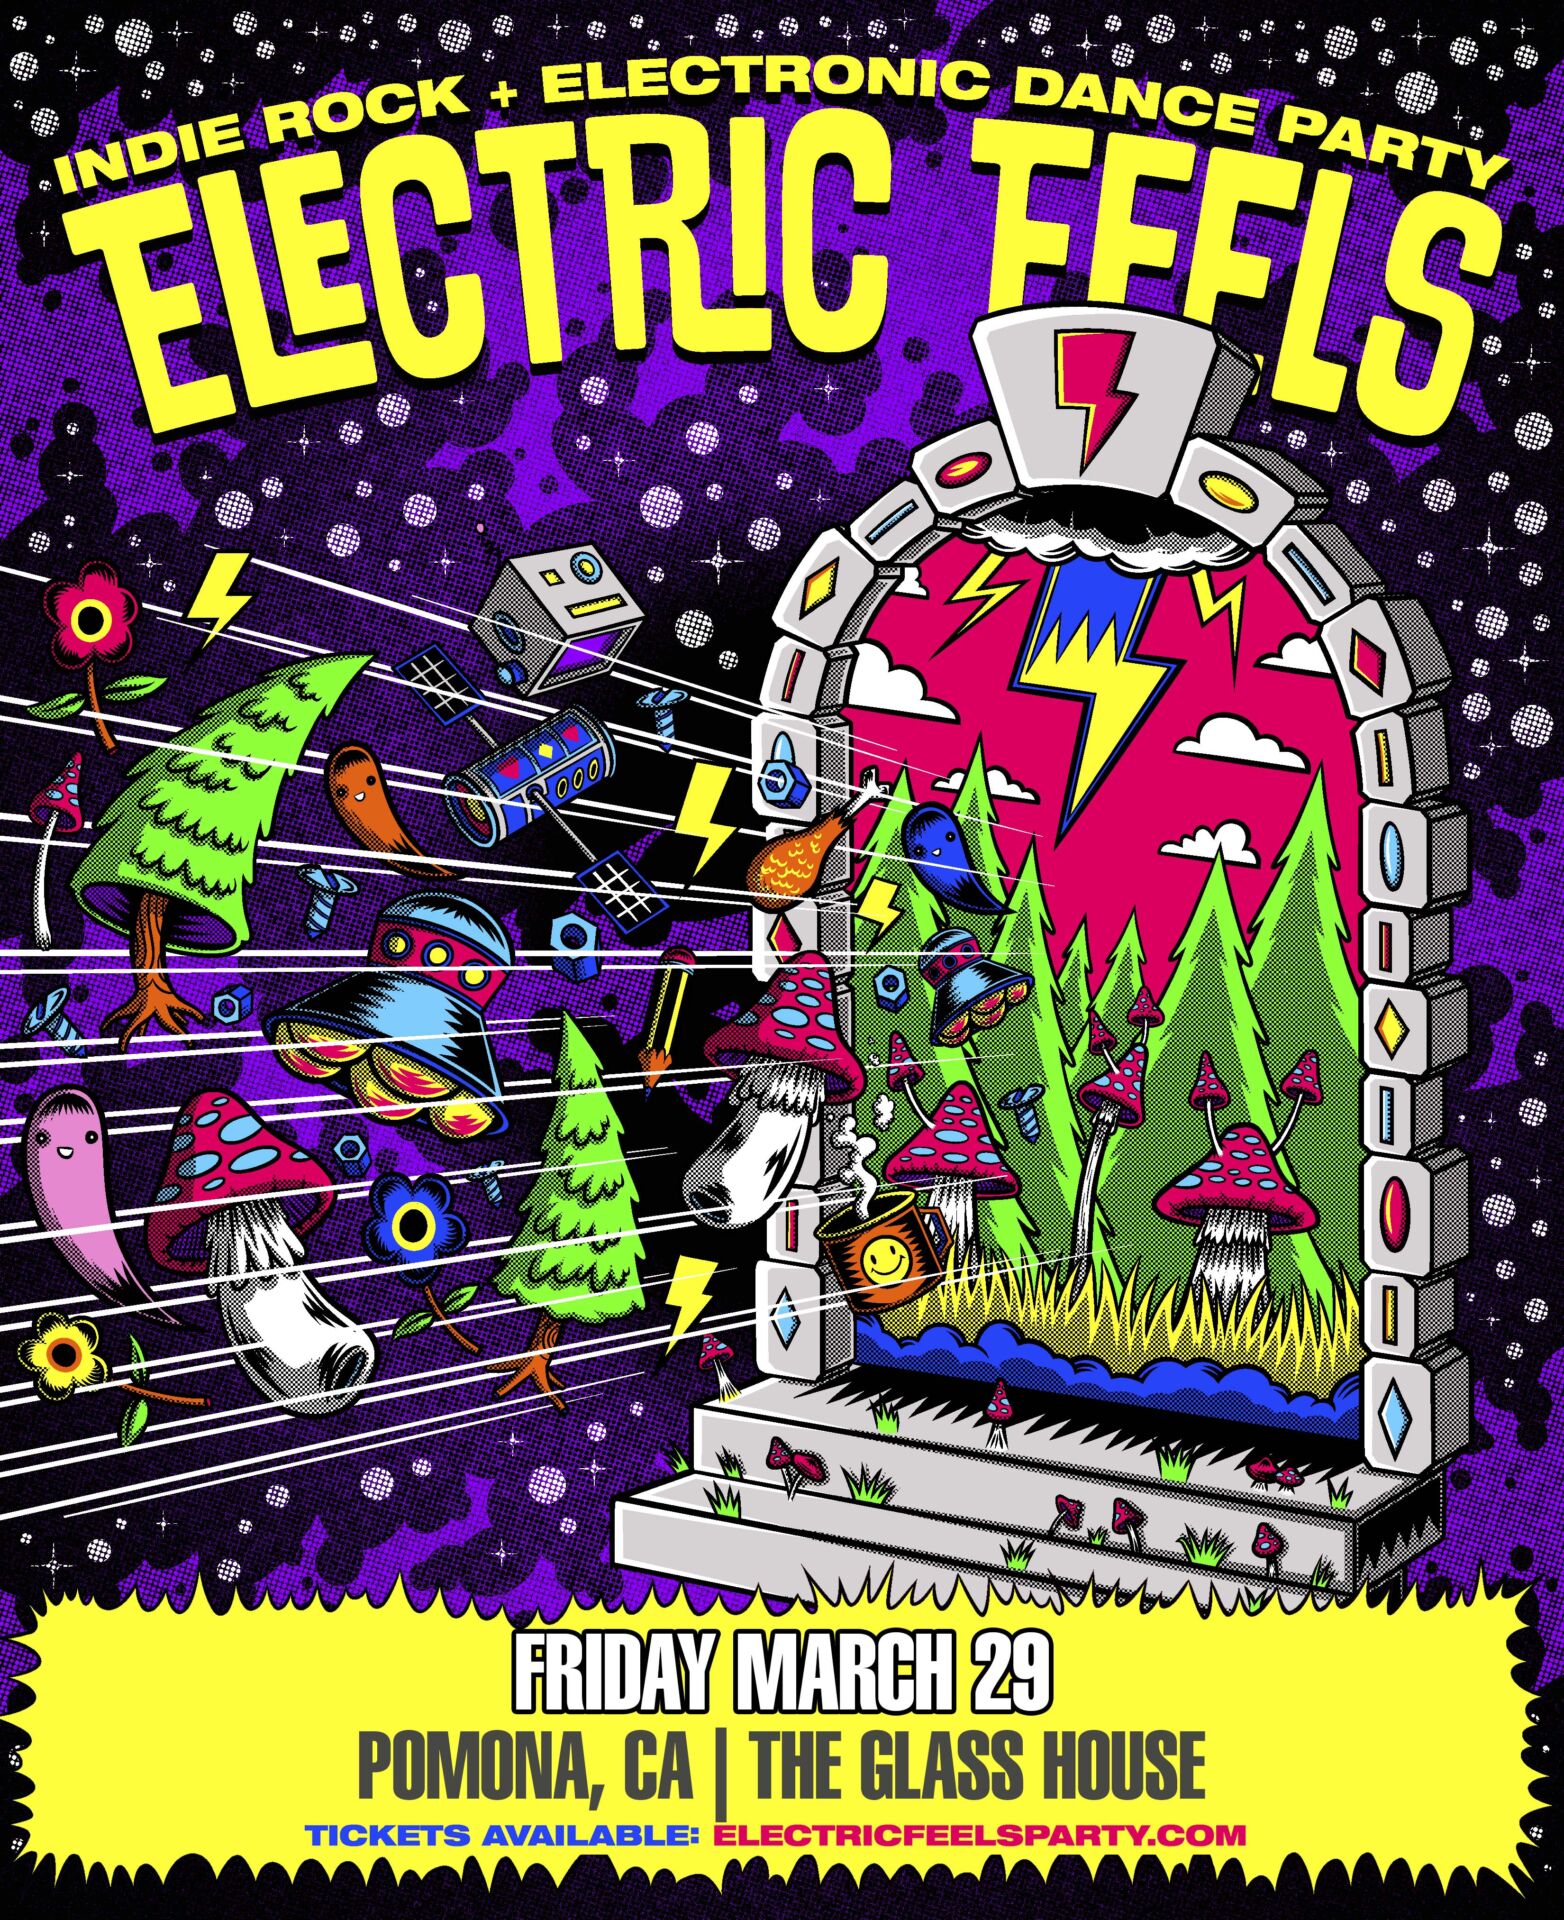 Electric Feels next party